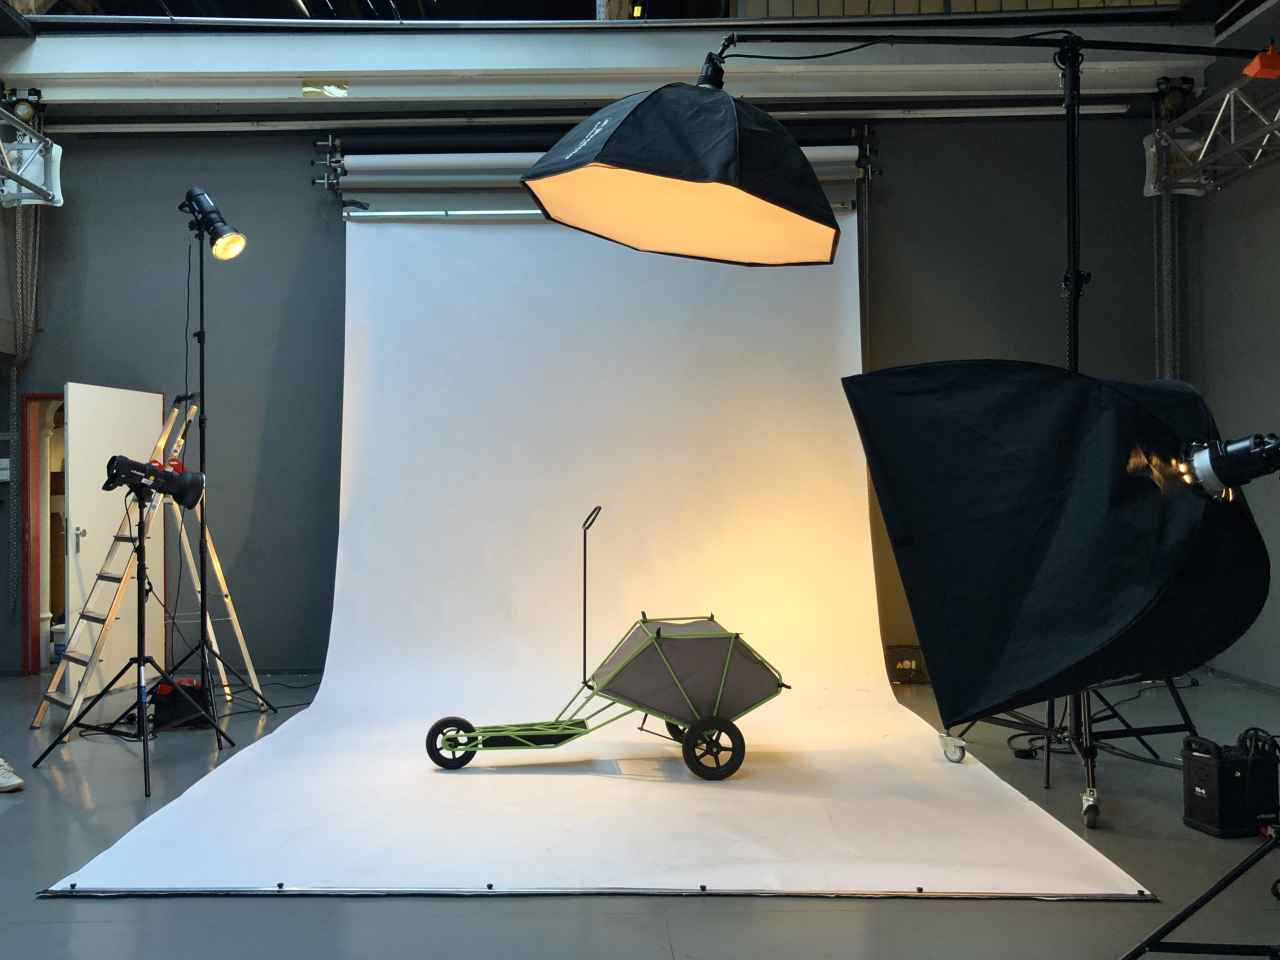 A three-wheeled cargo scooter during a photoshoot in a studio